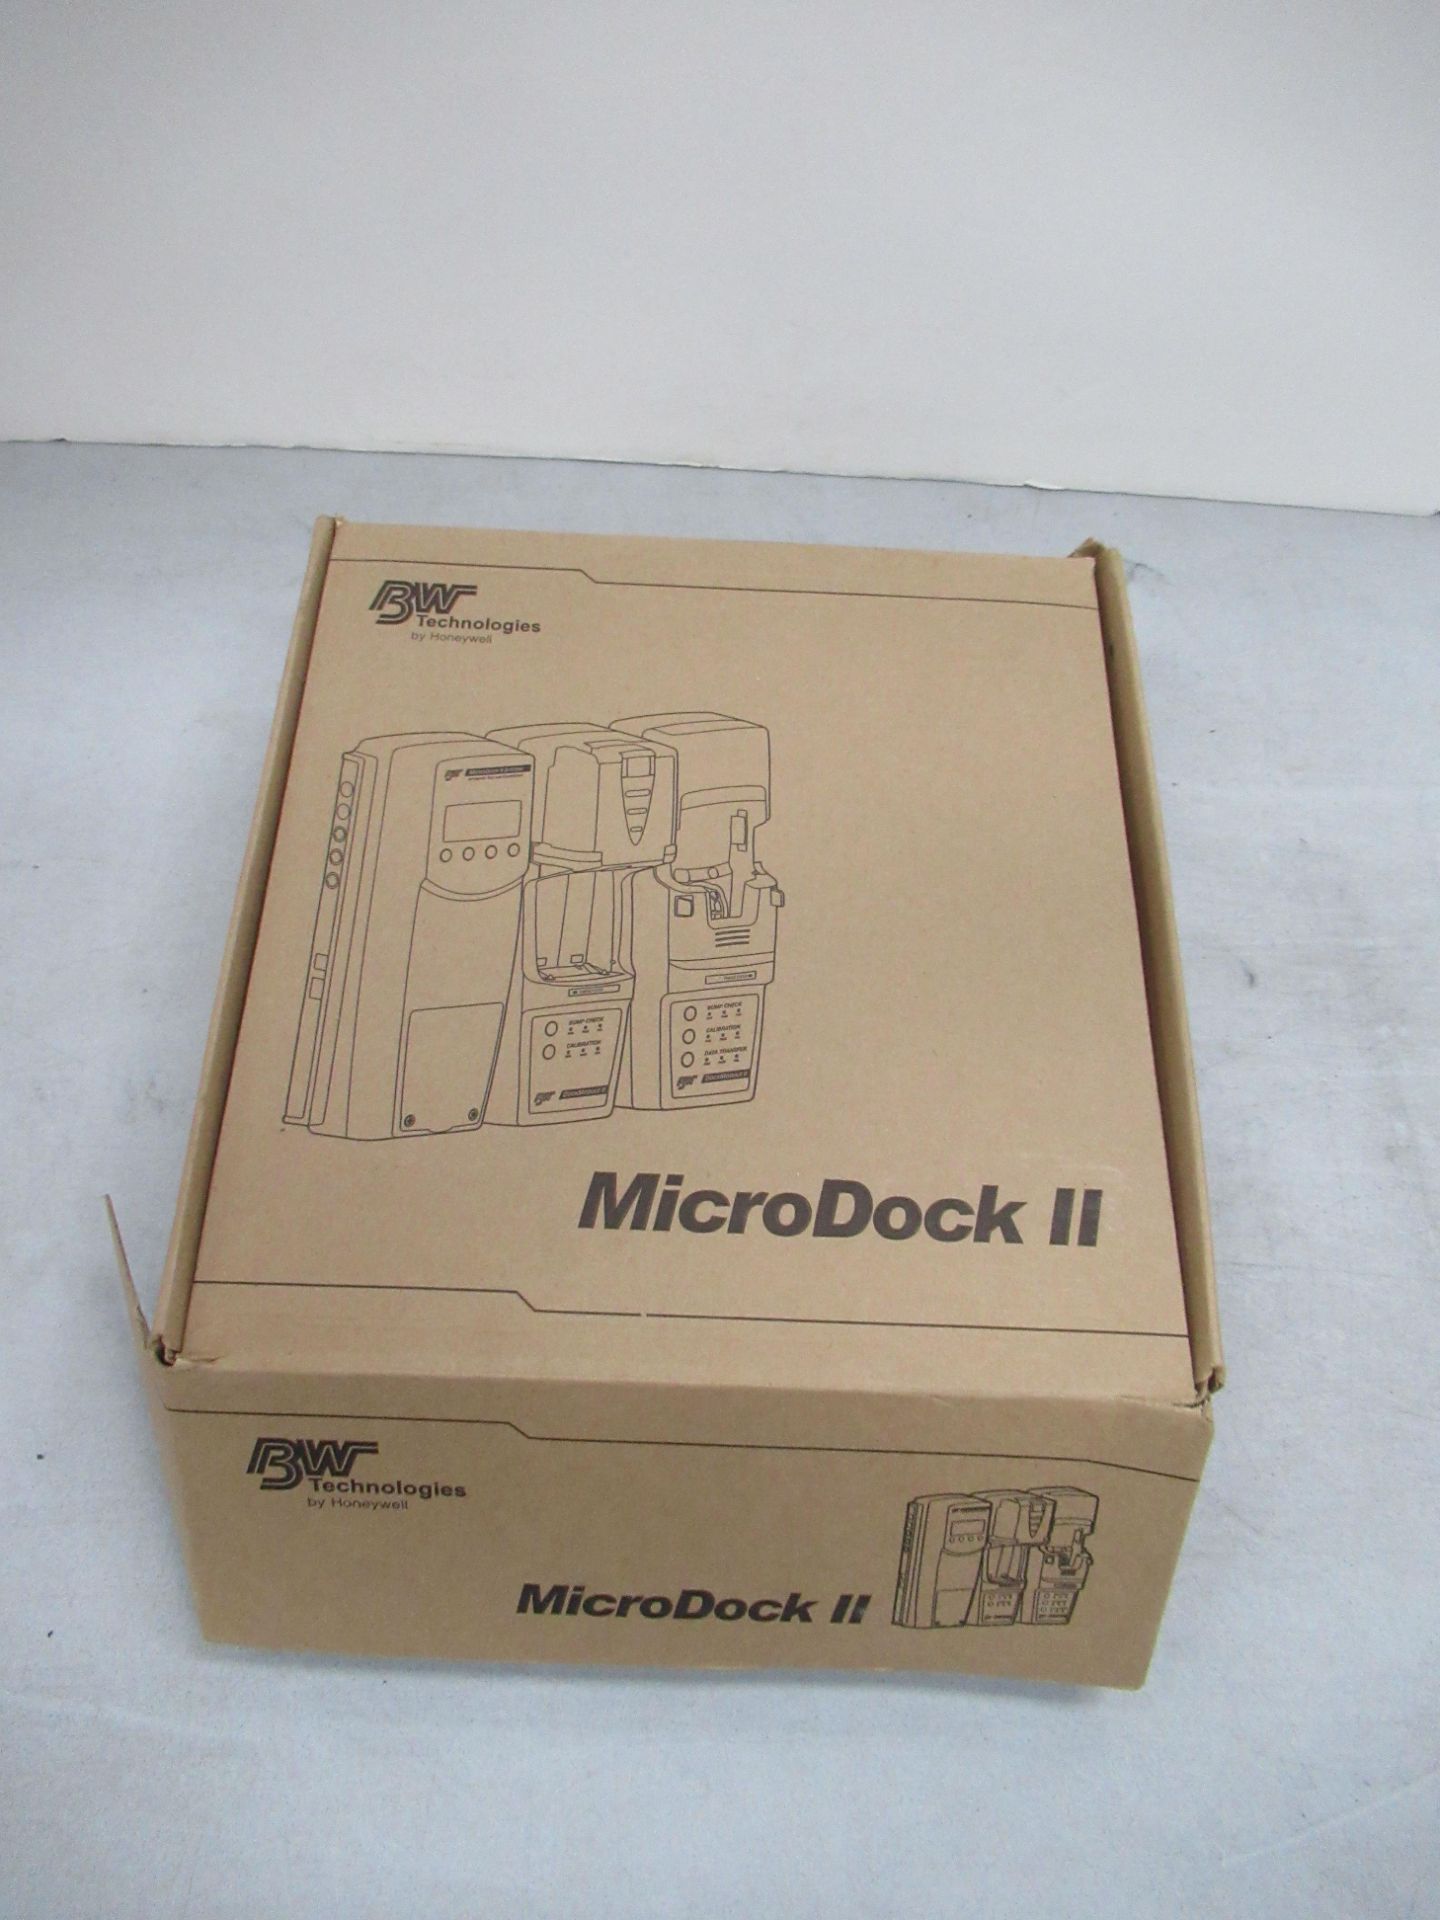 BW (By Honeywell) MicroDock II Docking Station - boxed